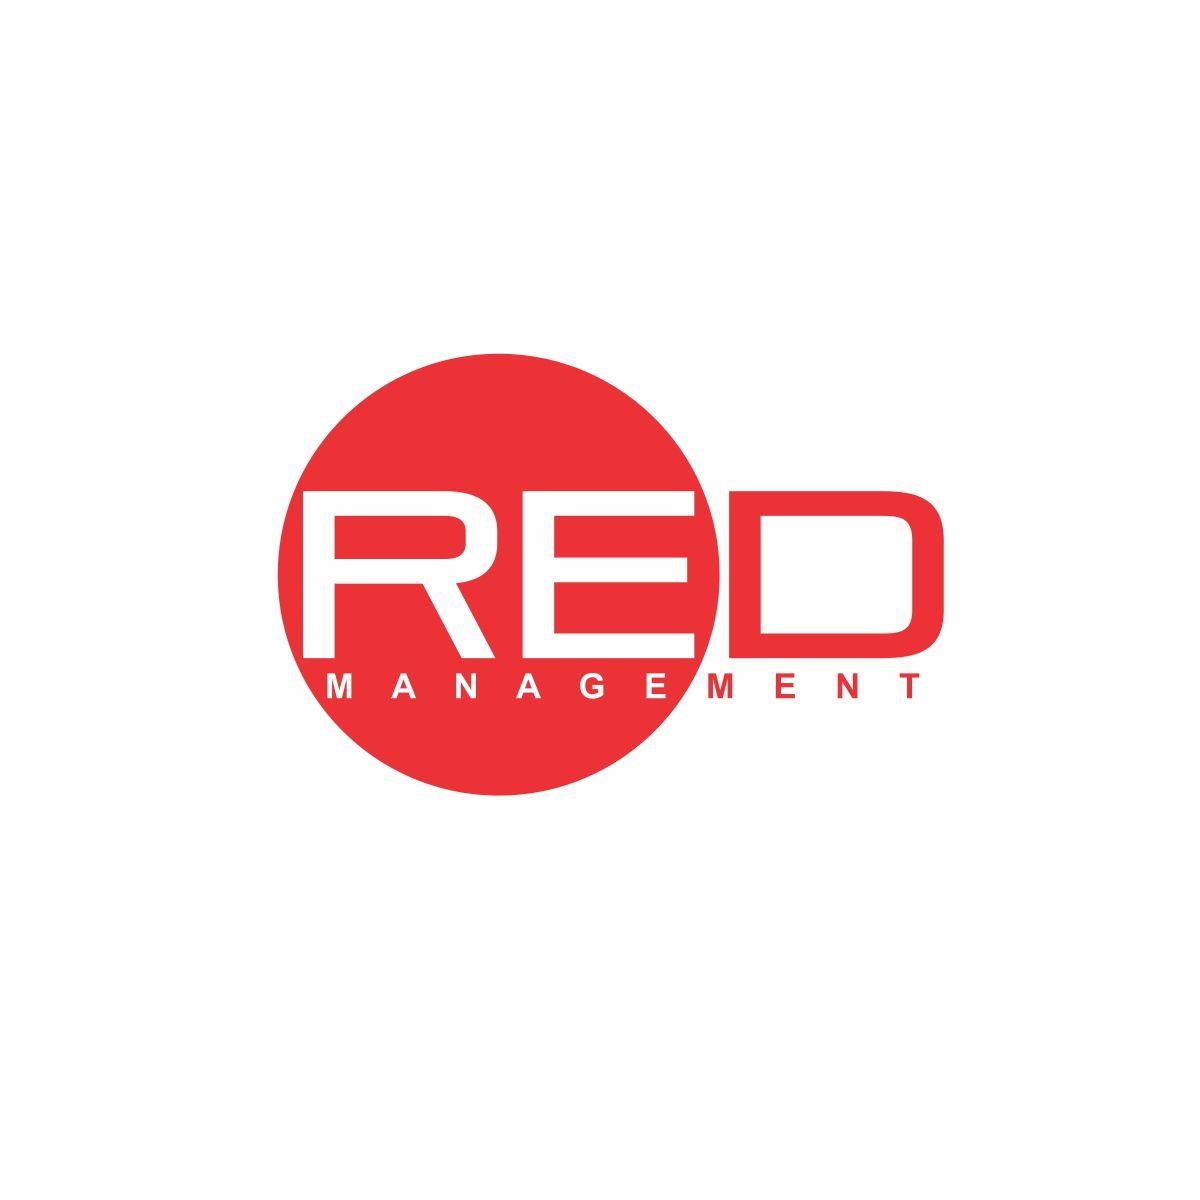 Red Circle Entertainment Logo - Bold, Serious, Entertainment Logo Design for RED Management